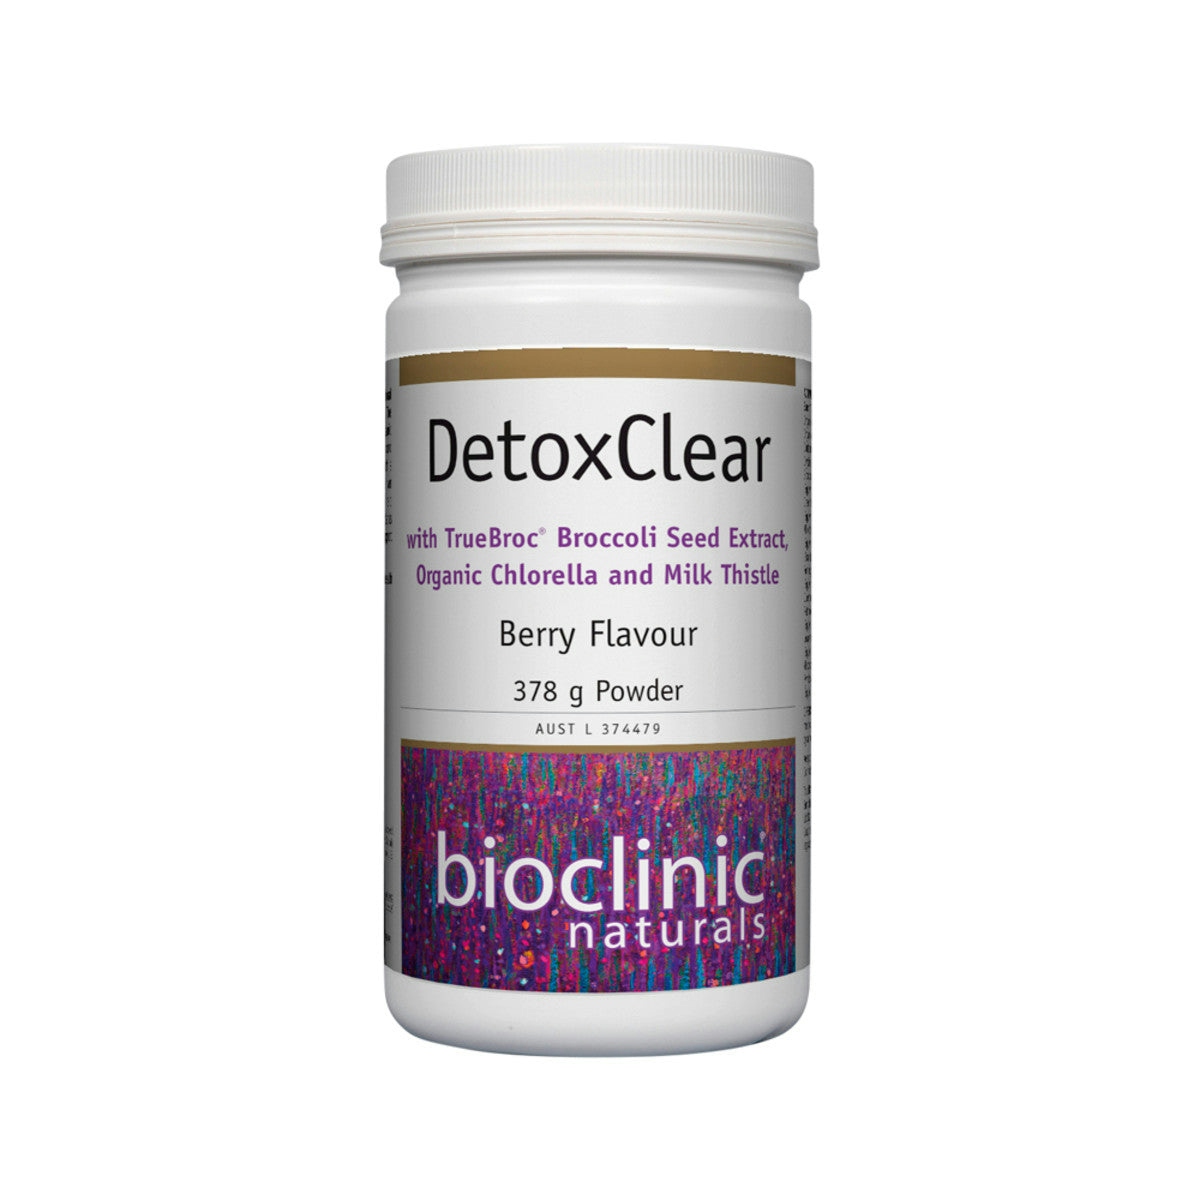 image of Bioclinic Naturals DetoxClear Berry 378g on white background